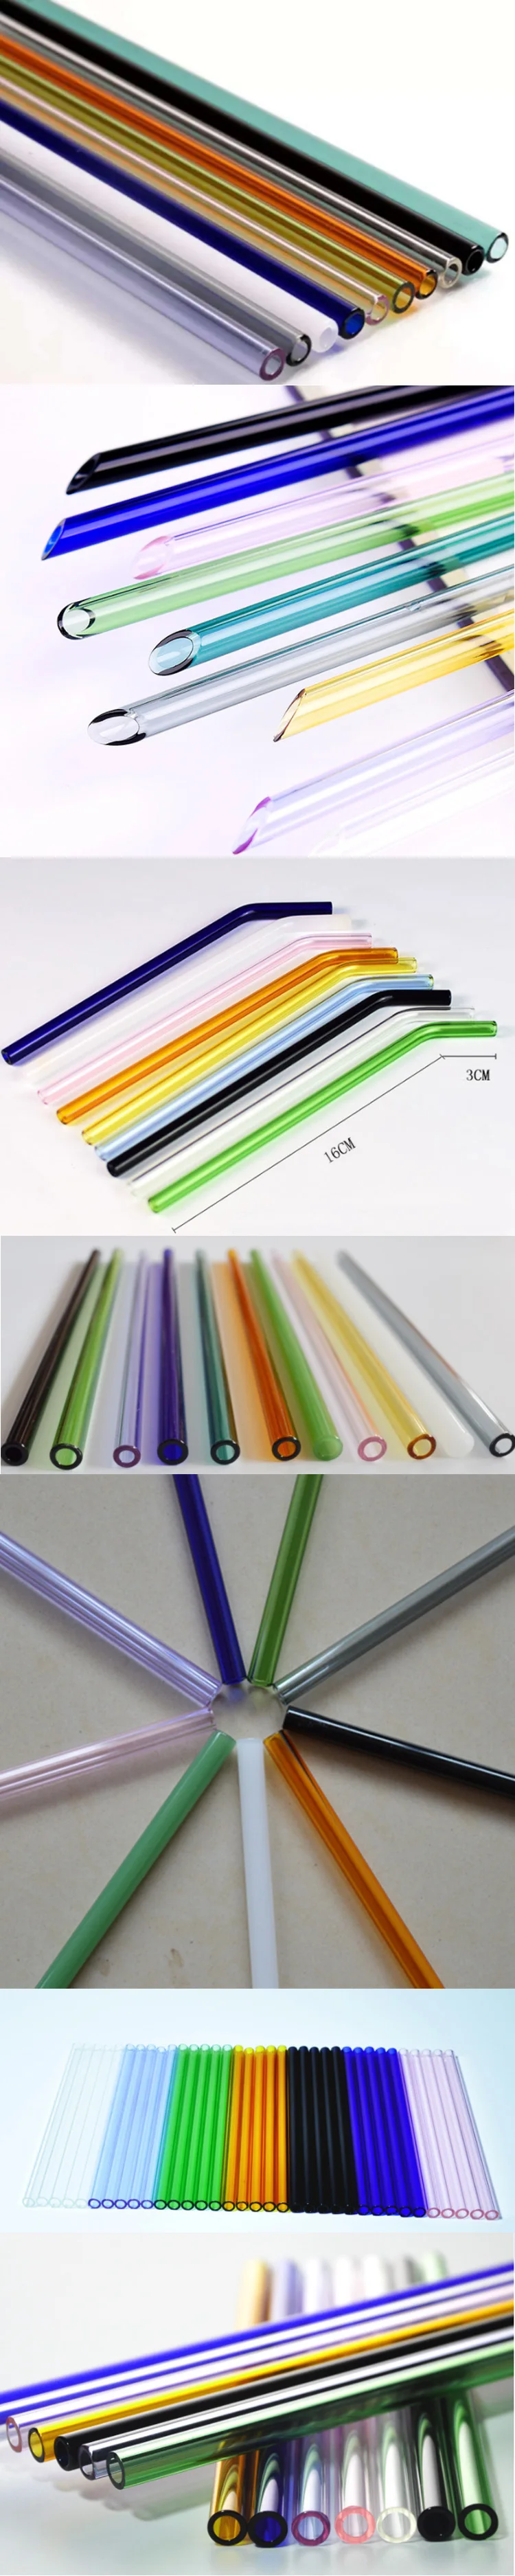 Reusable Non-toxic Eco Straw Straight Bent Pyrex Glass Drinking Straw